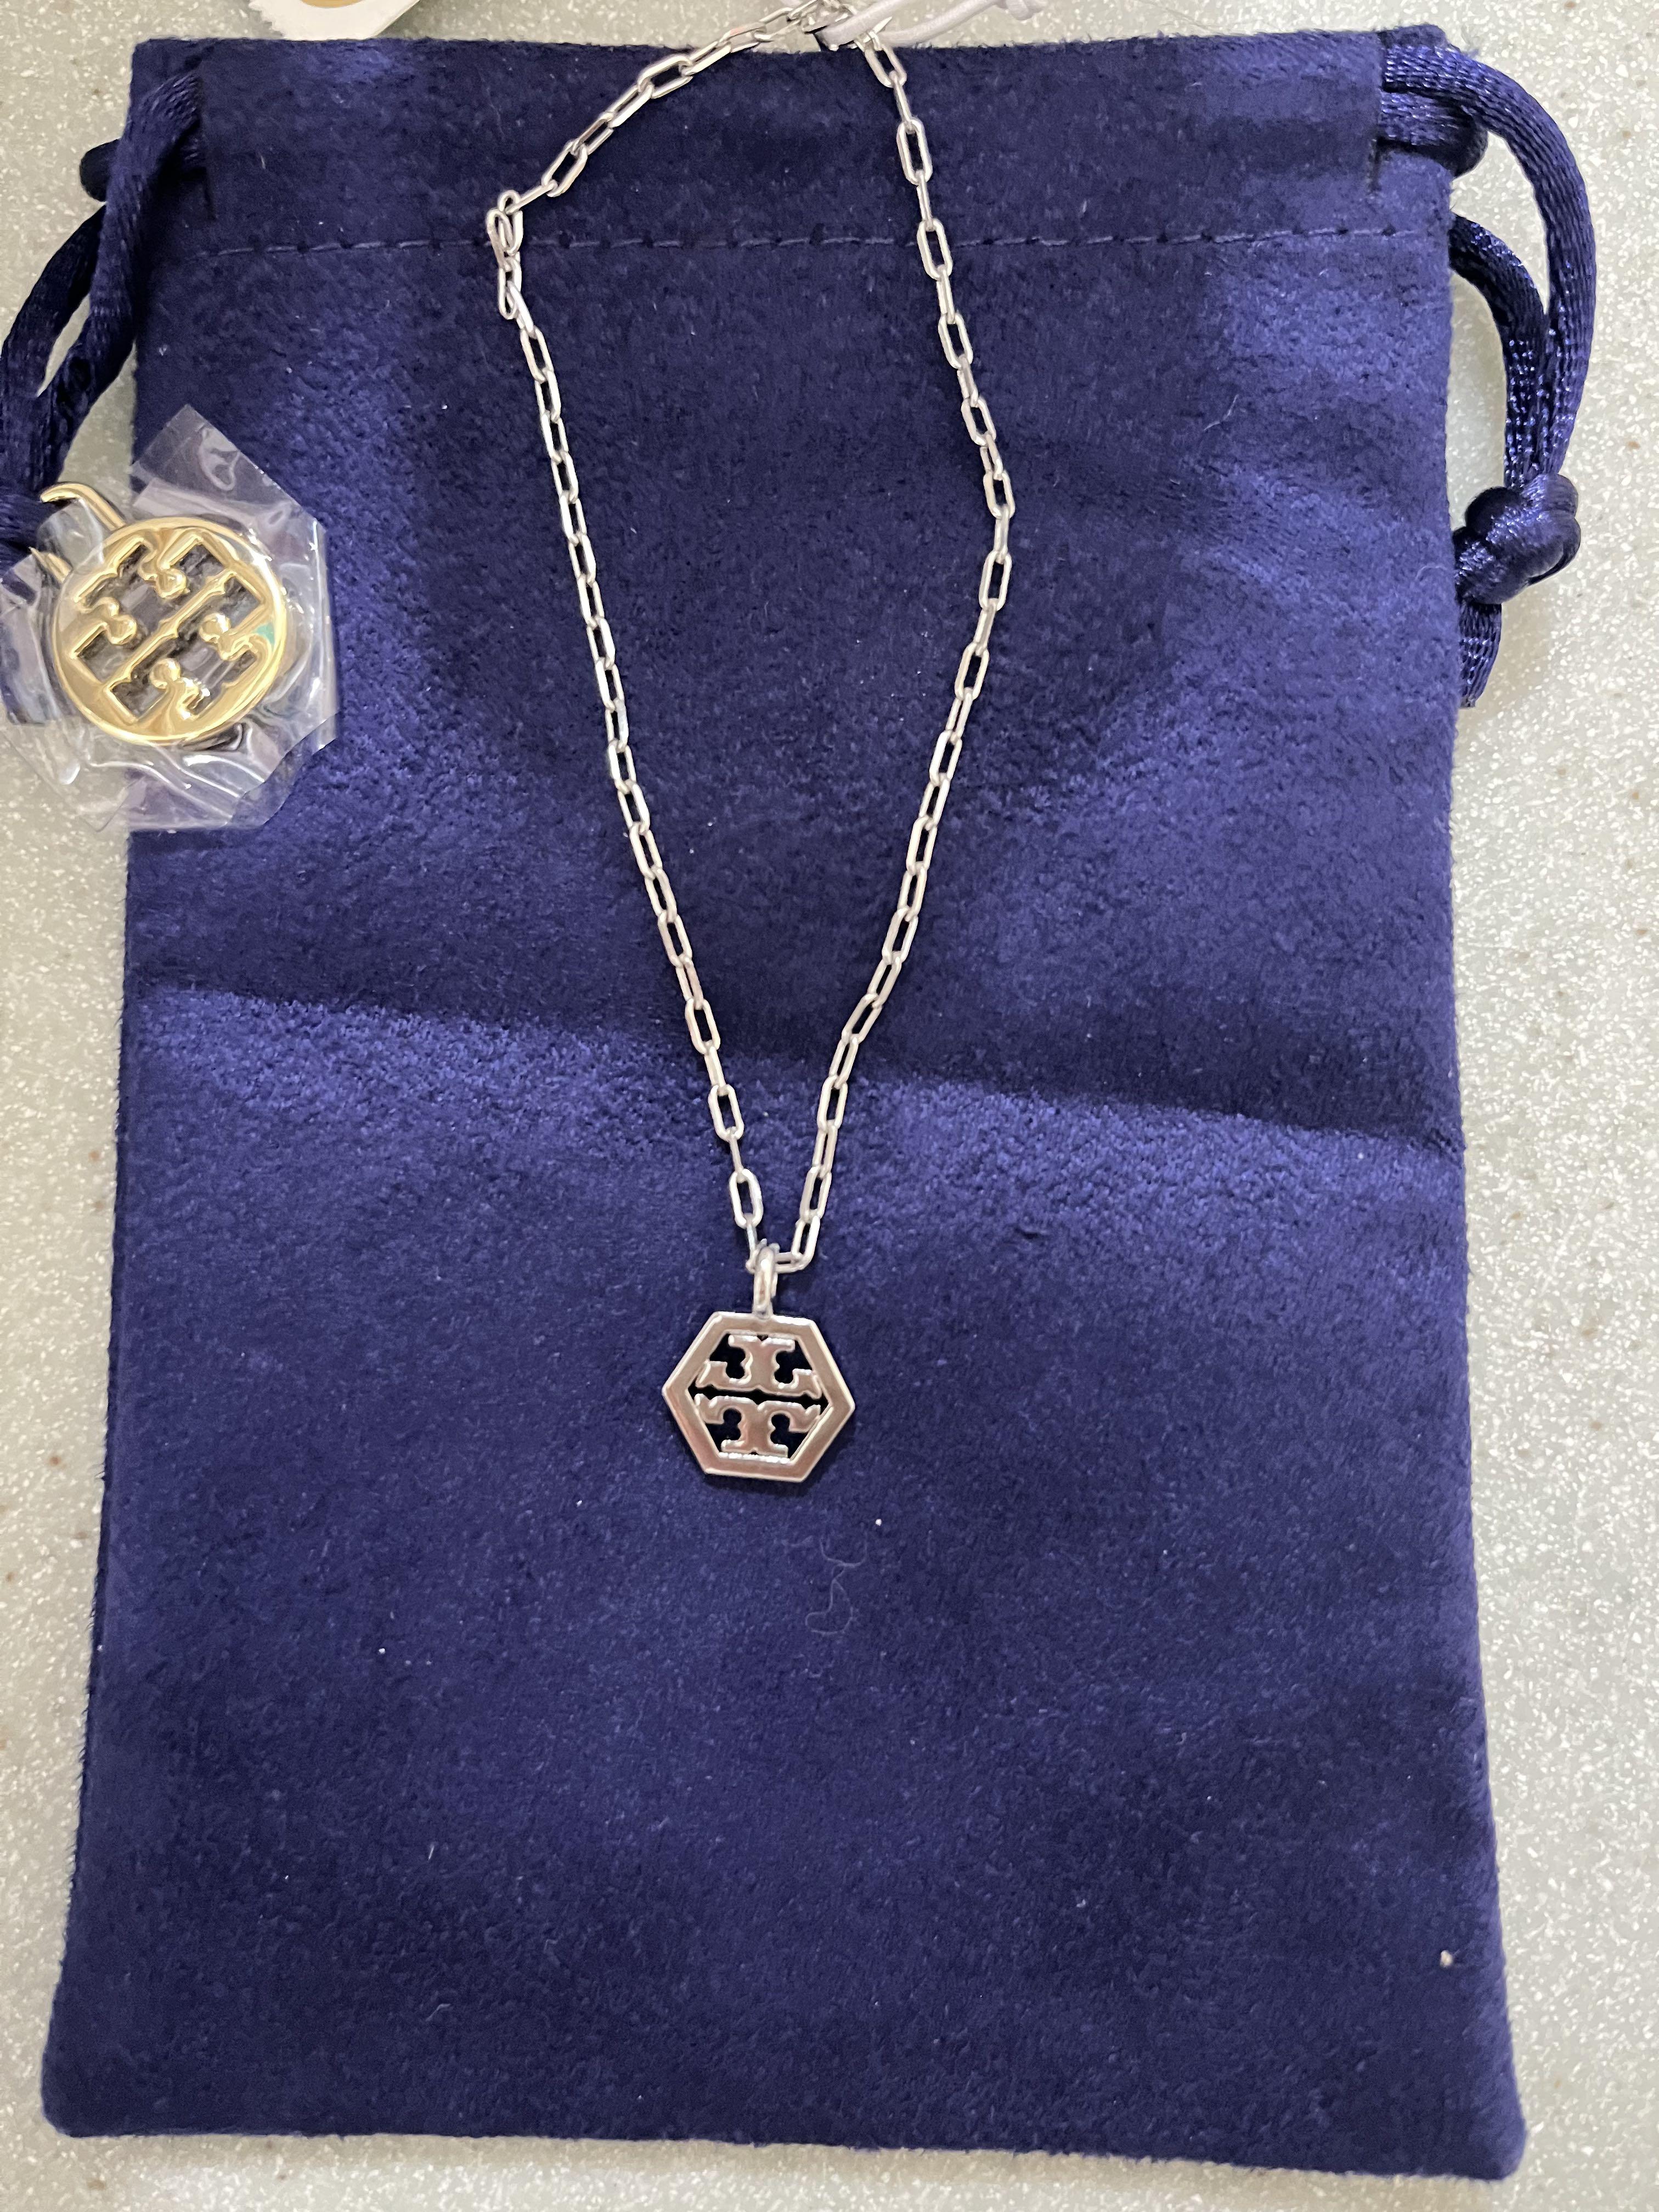 Tory Burch gold logo necklace